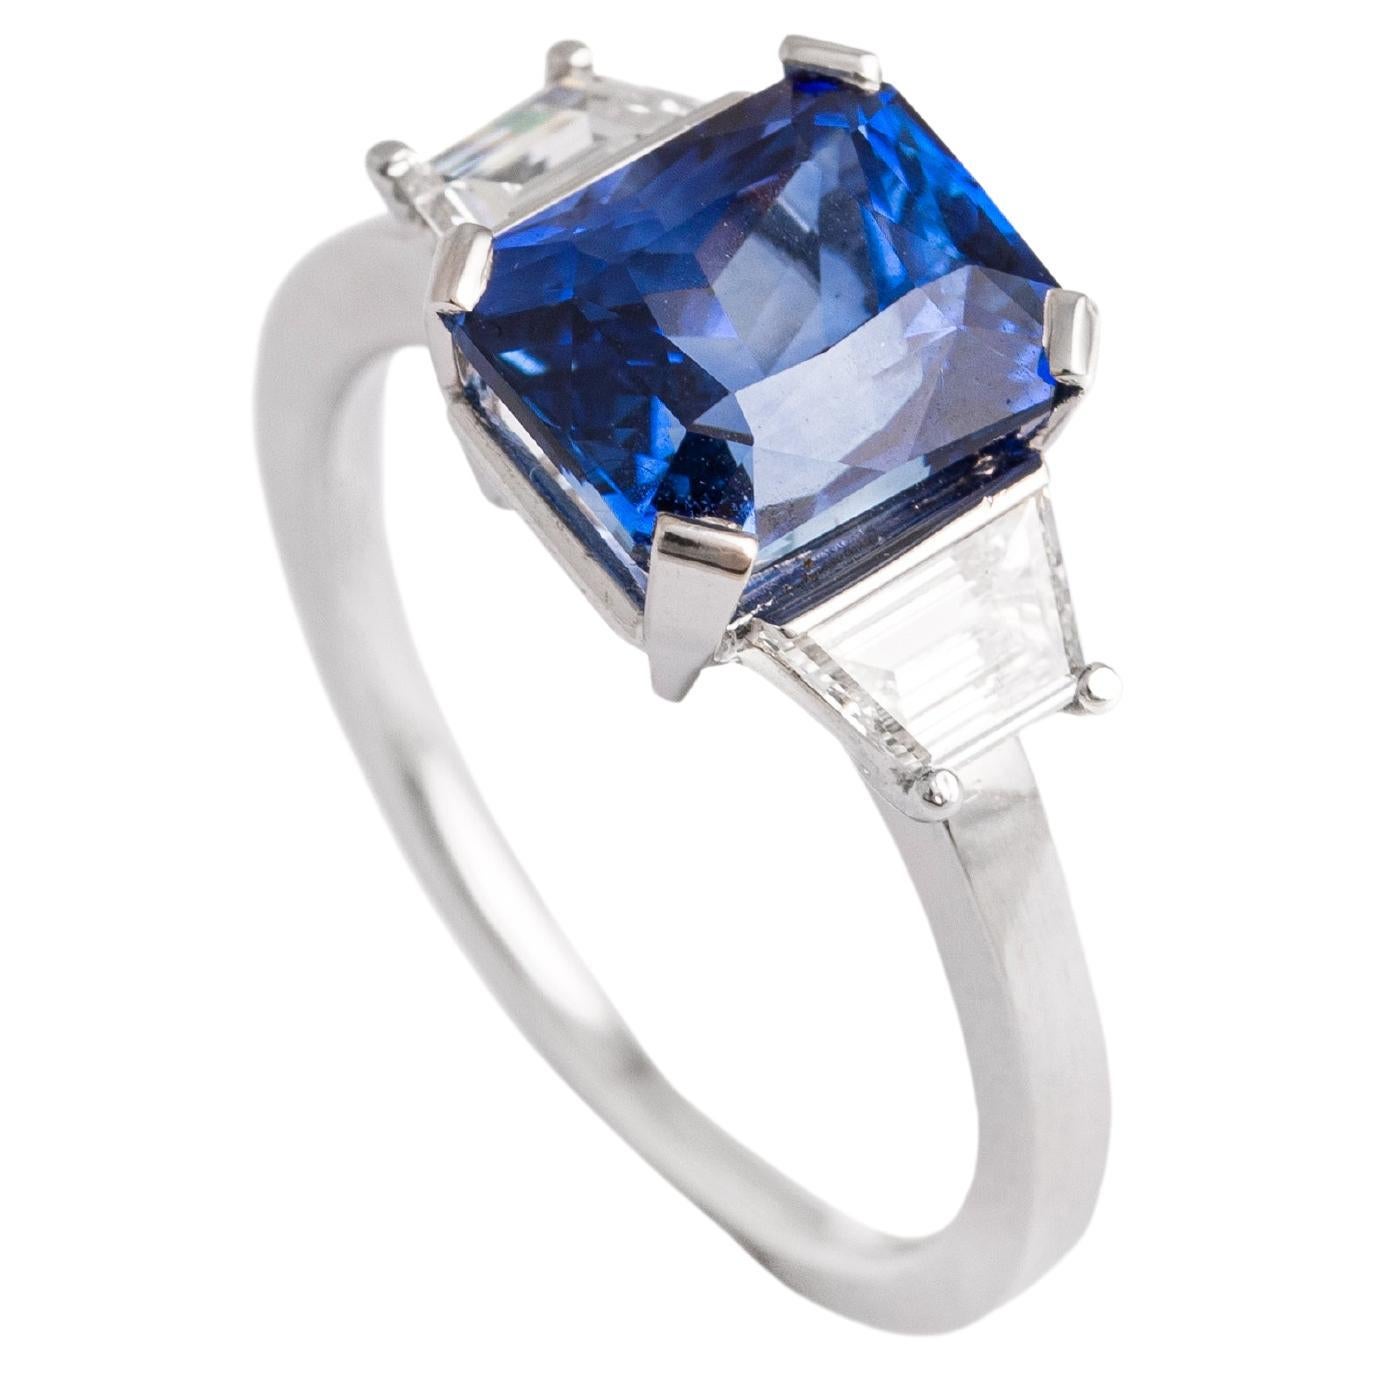 4.05 Carat Blue Sapphire White Gold Ring For Sale